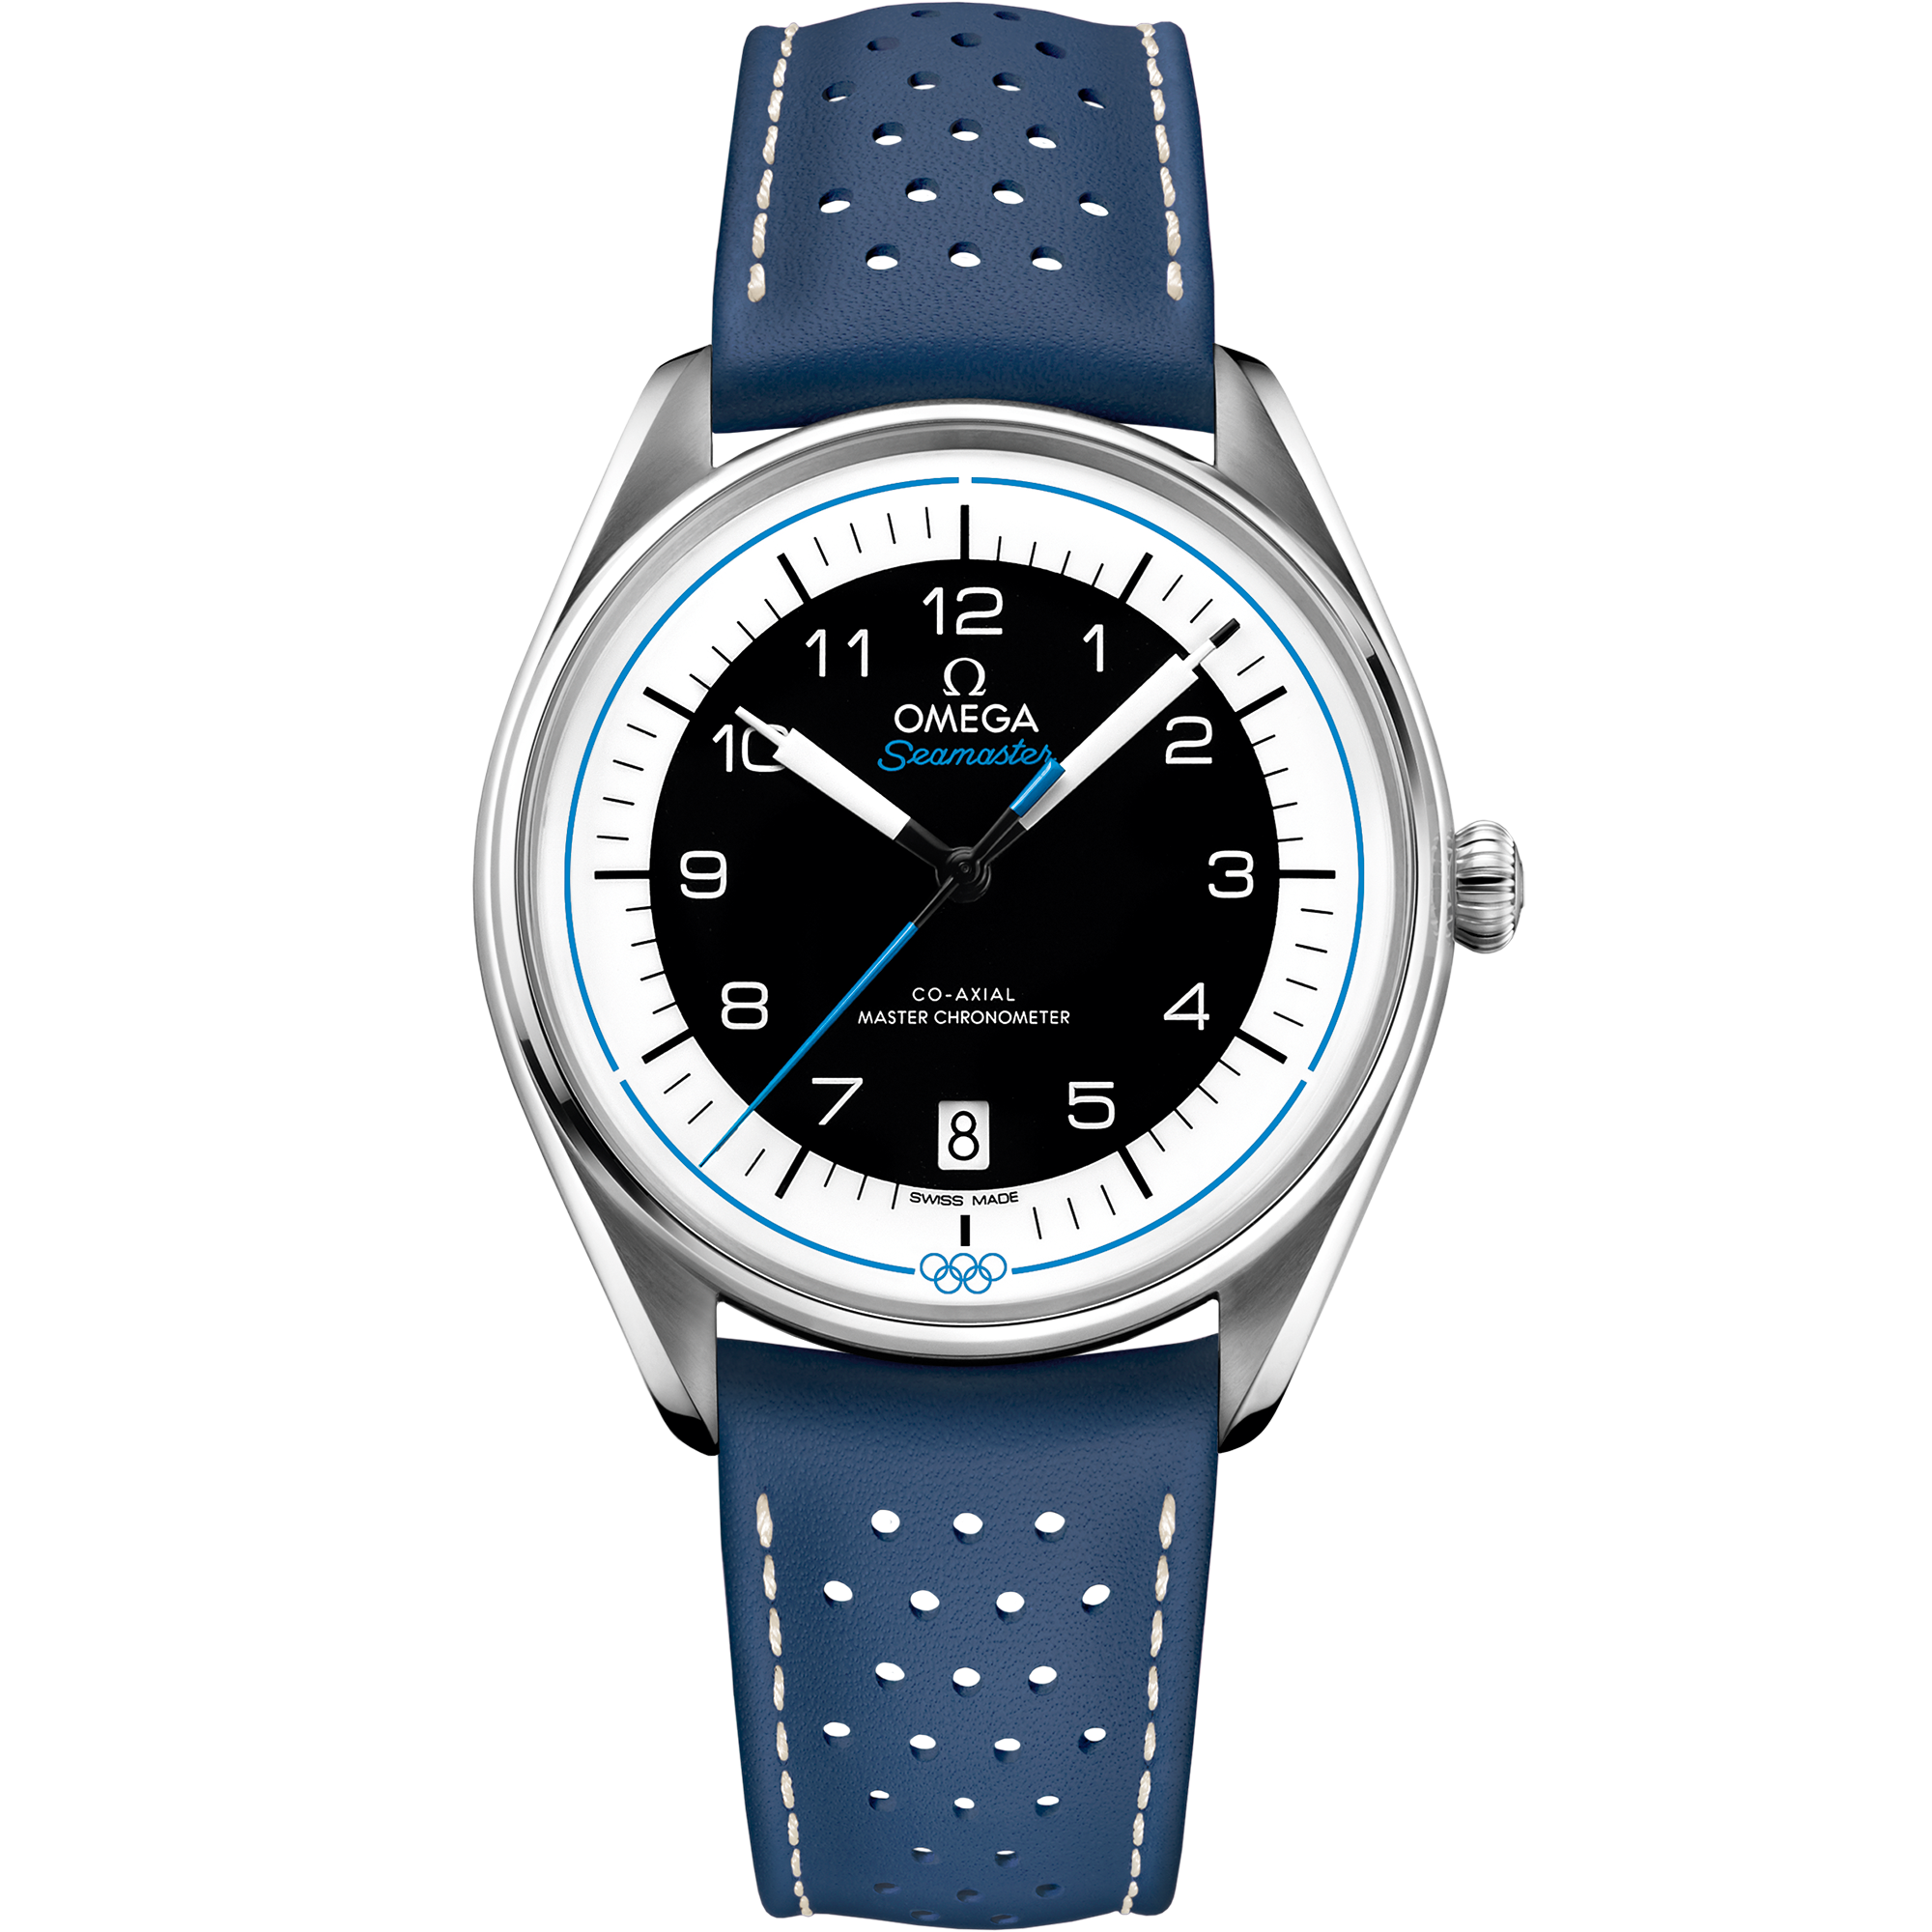 Seamaster 39.5 mm, steel on leather strap - 522.32.40.20.01.001